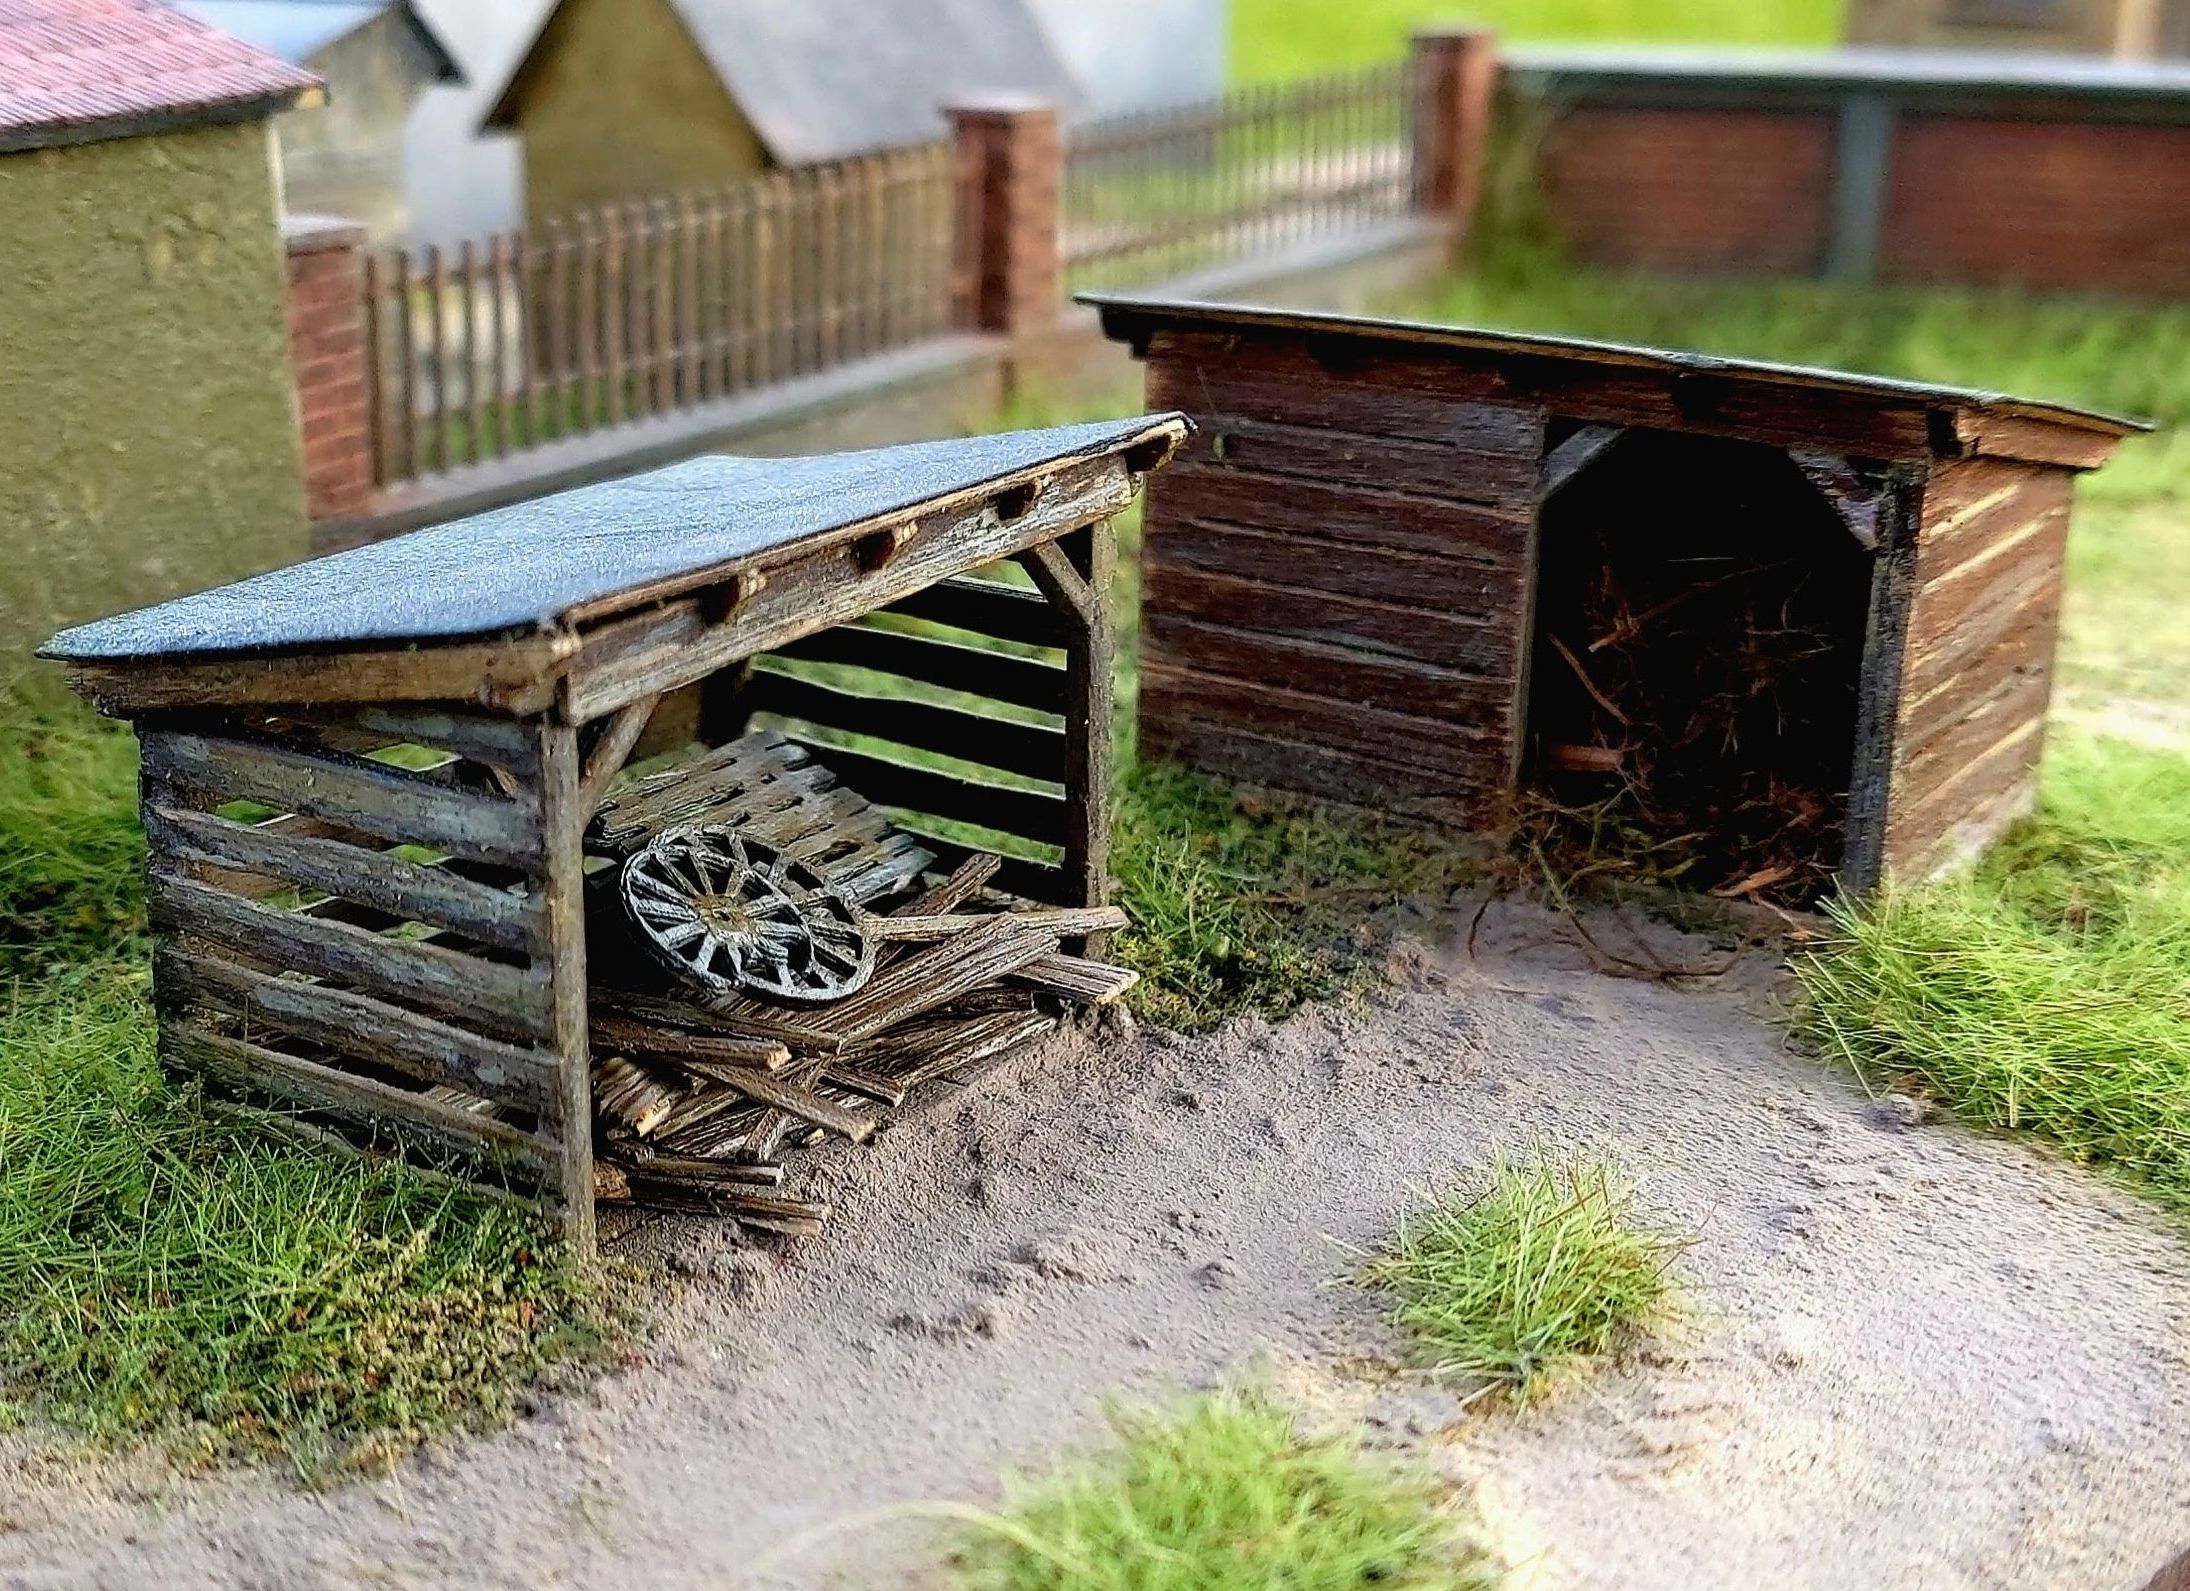 2x Wooden shed 1:87 (kit)